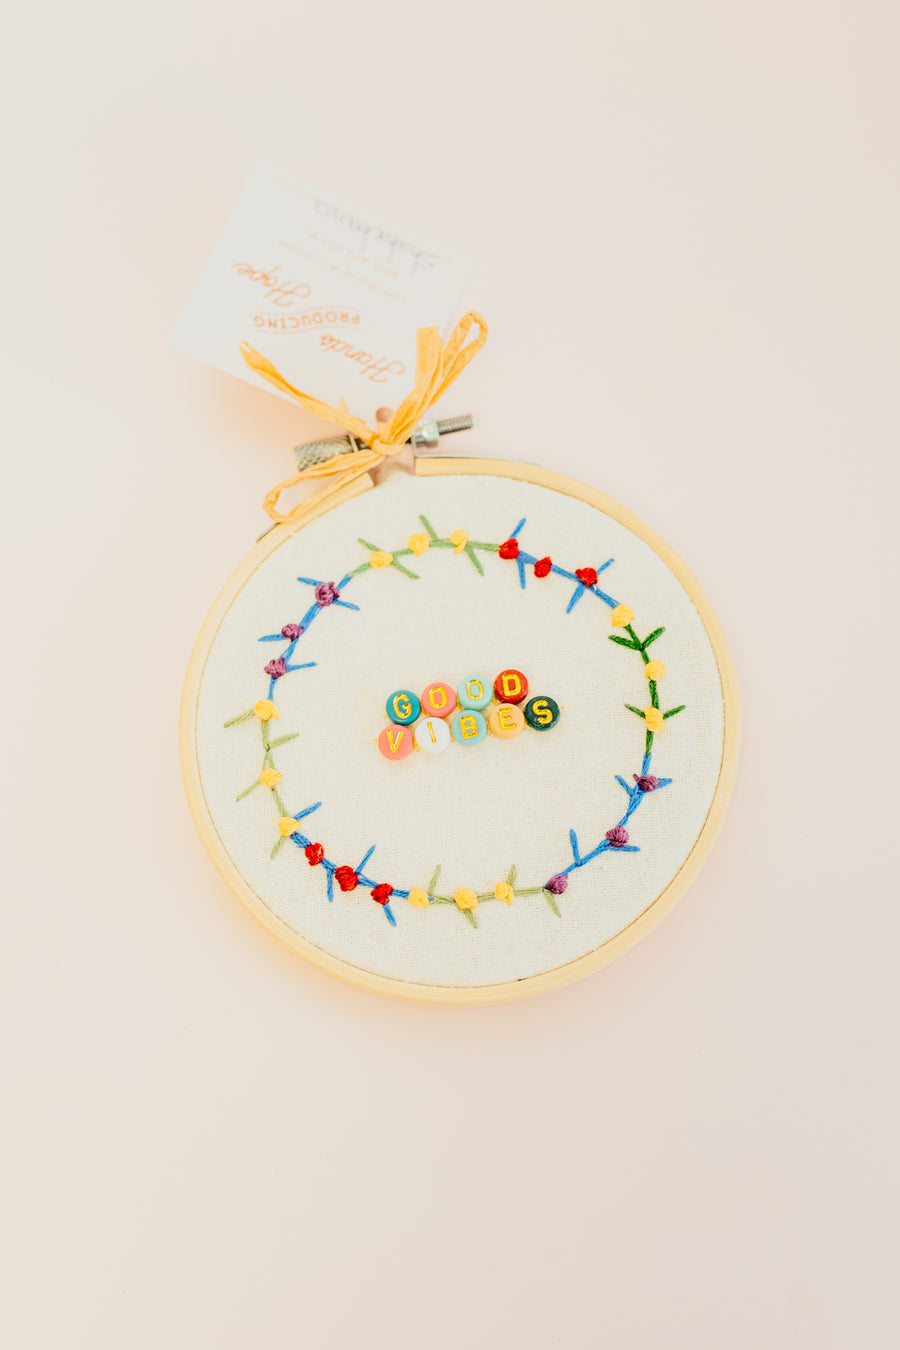 Good Vibes Embroidery Hoop